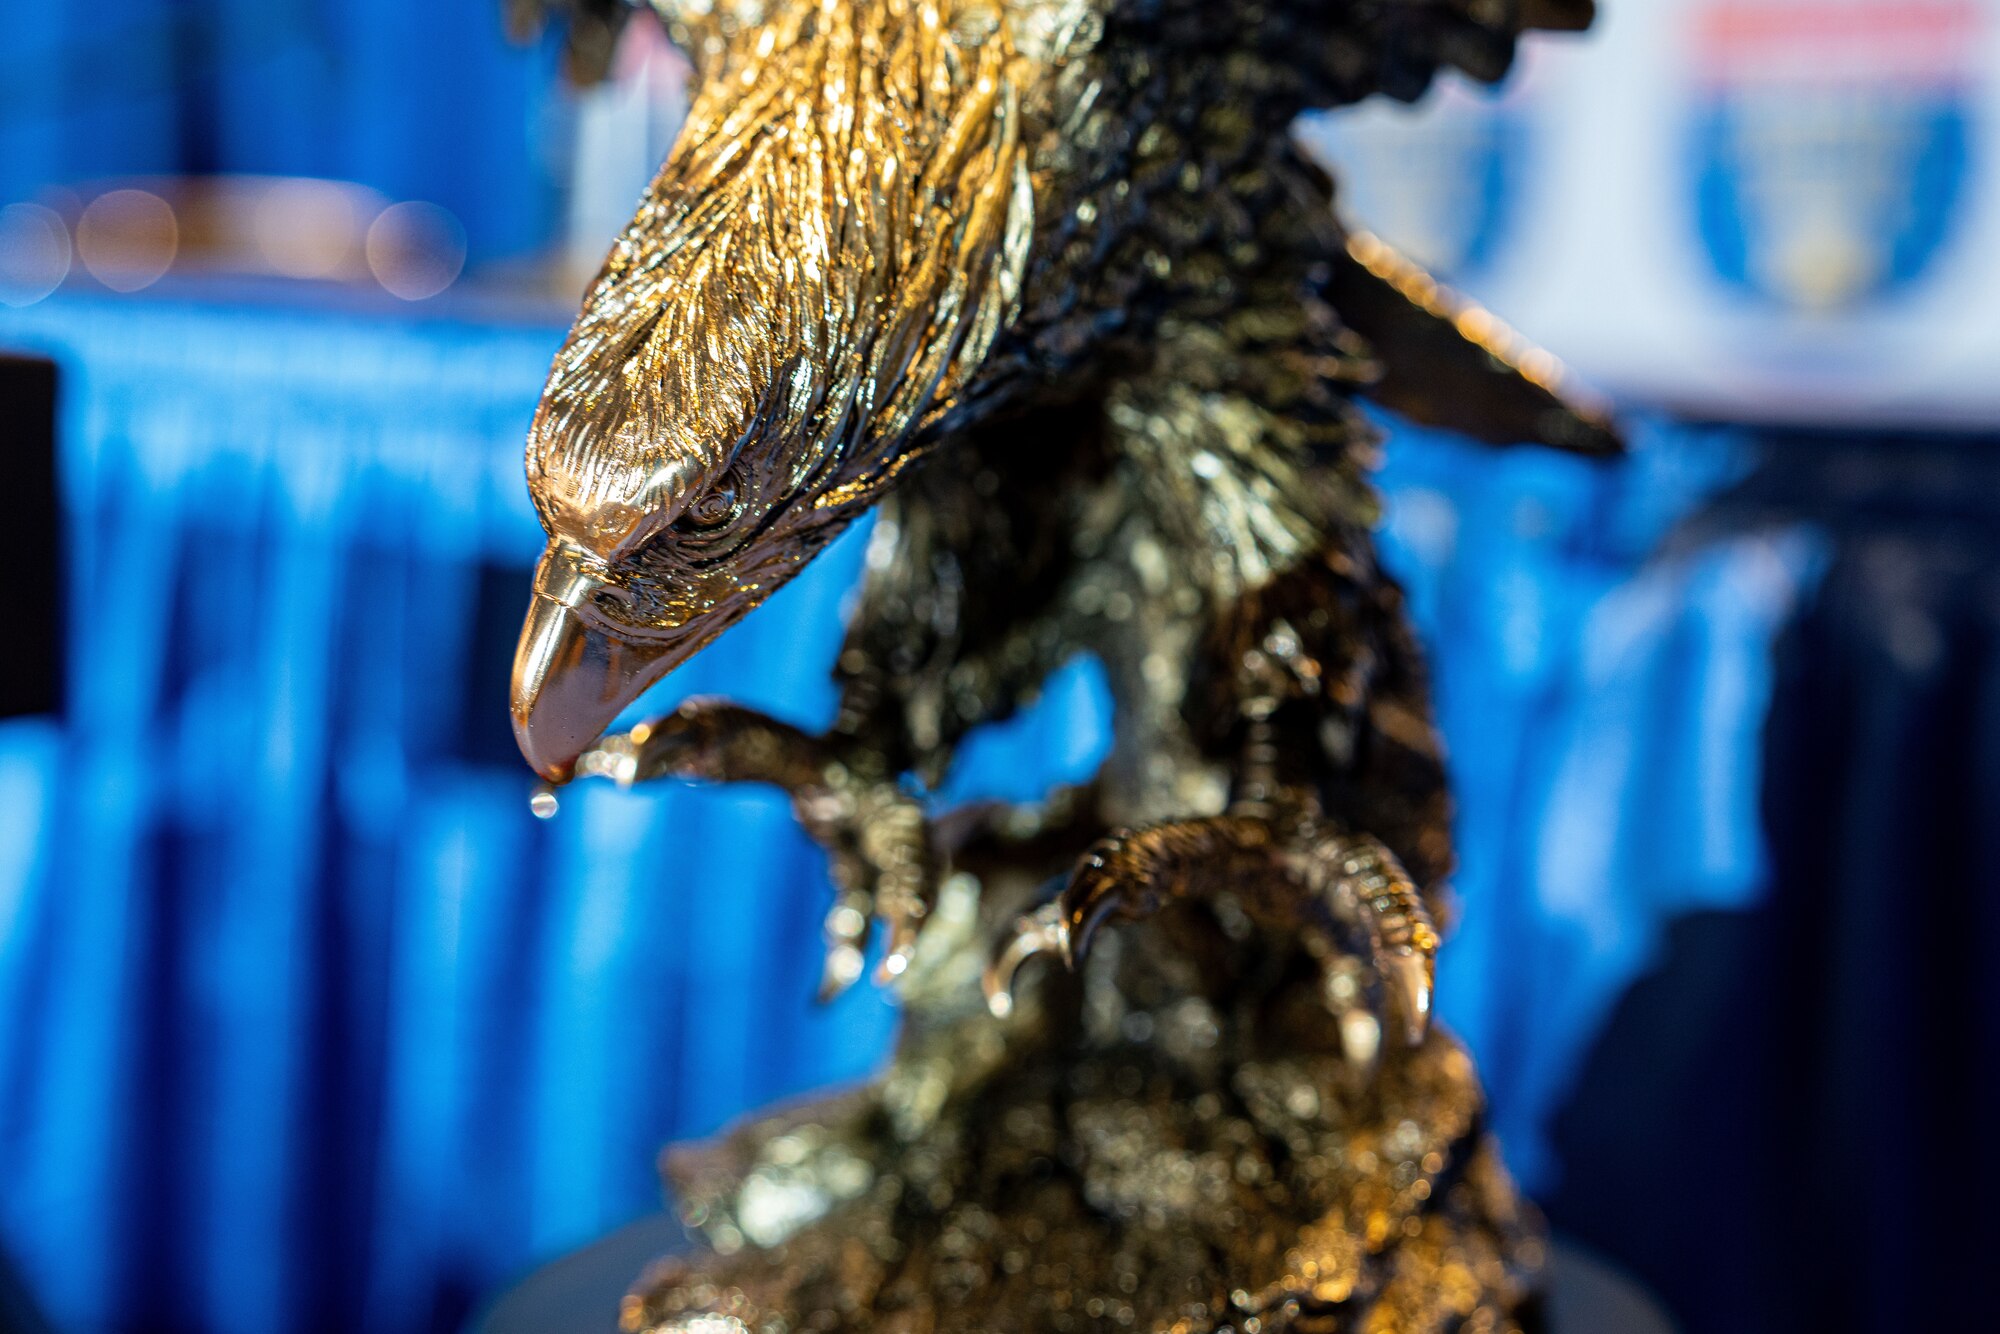 A close-up image of an eagle trophy. The trophy is in sharp focus against a blurred background featuring blue banners with the Liberty Bowl logo.